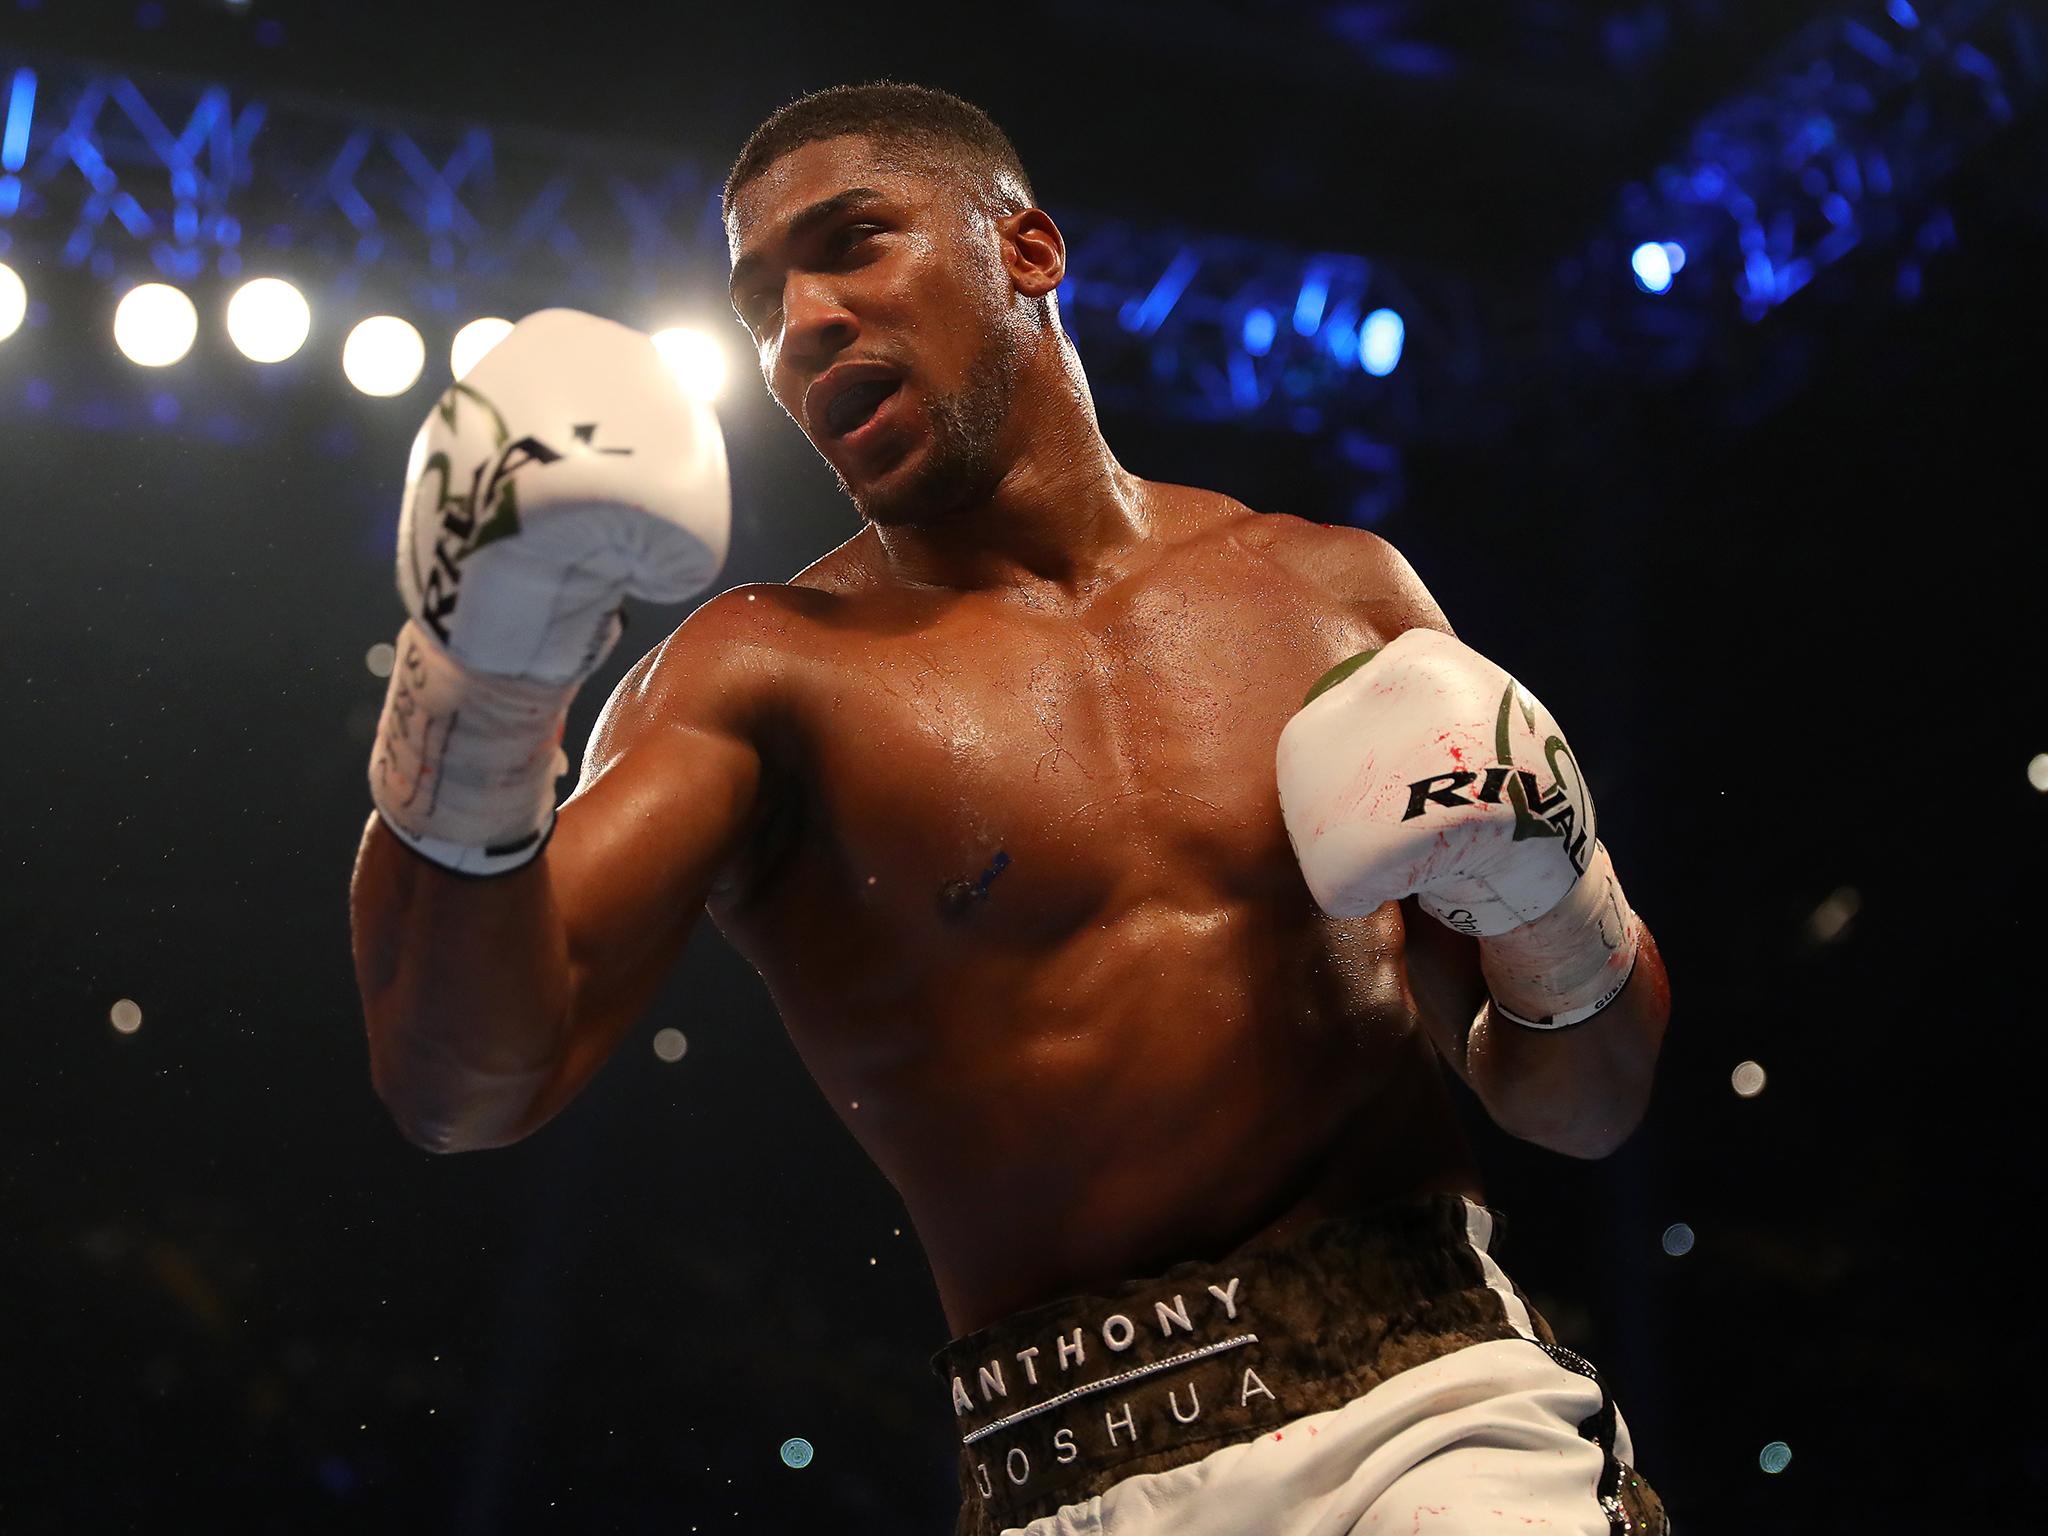 Anthony Joshua could fight either Deontay Wilder or Joseph Parker in his next fight